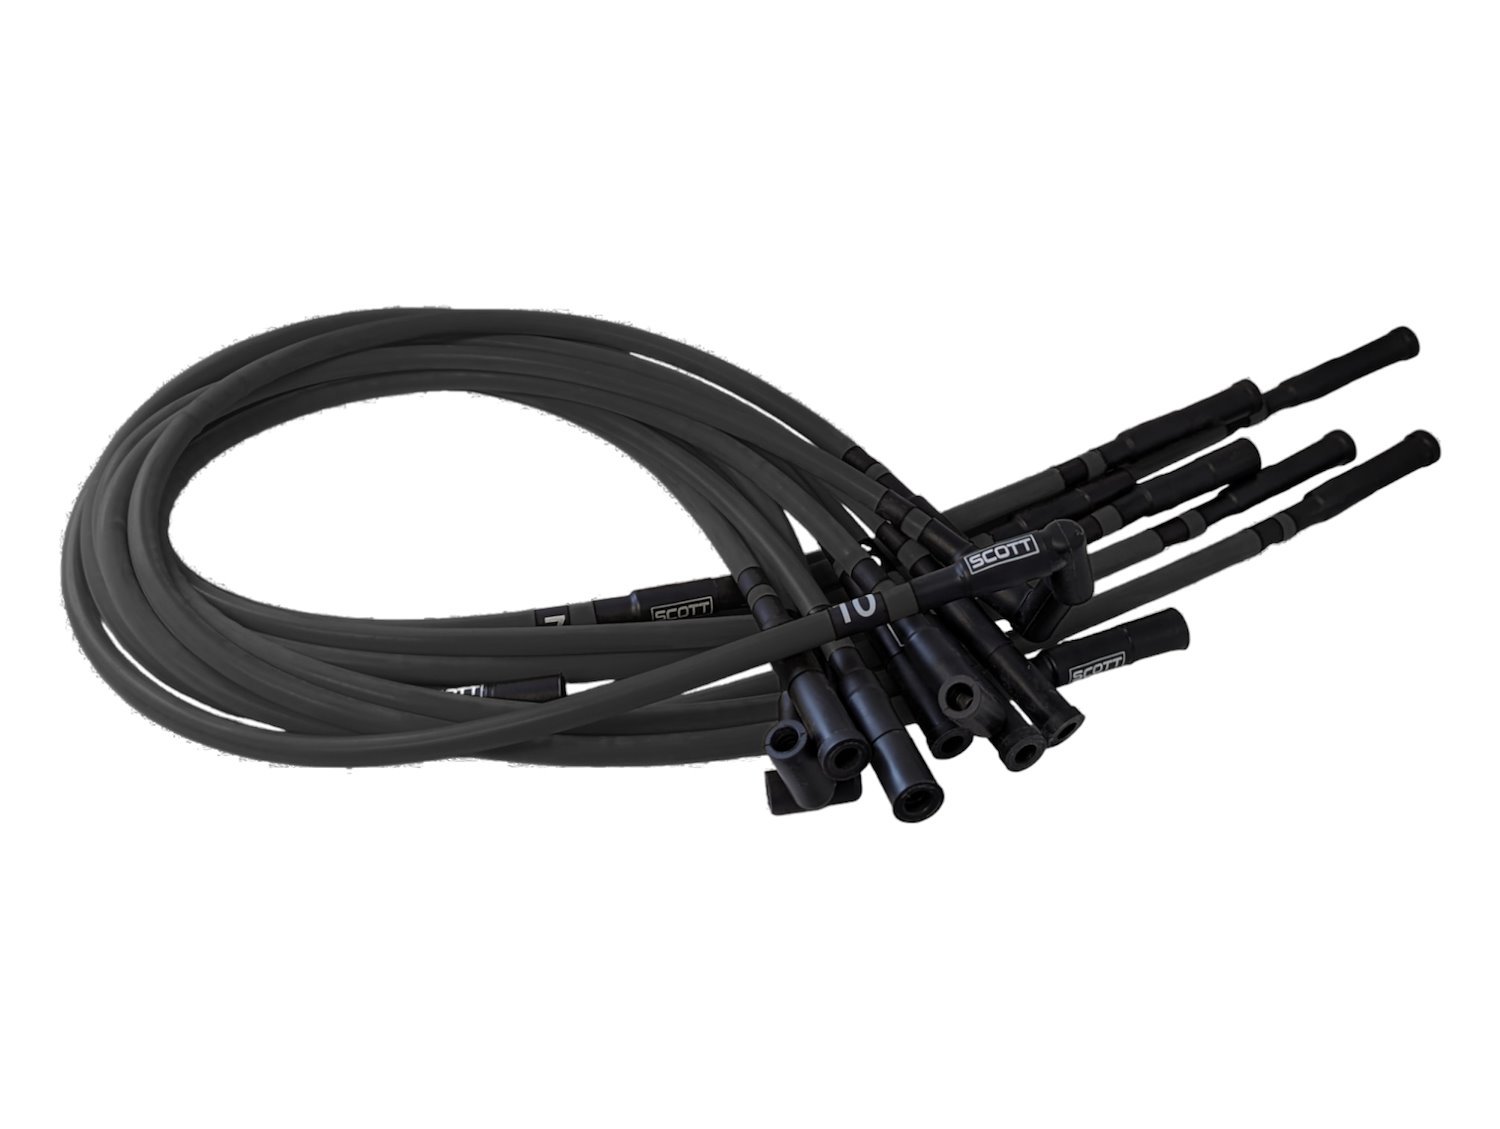 SPW-CH-690-III-1 High-Performance Silicone-Sleeved Spark Plug Wire Set for Dodge Viper (Gen-3) [Black]